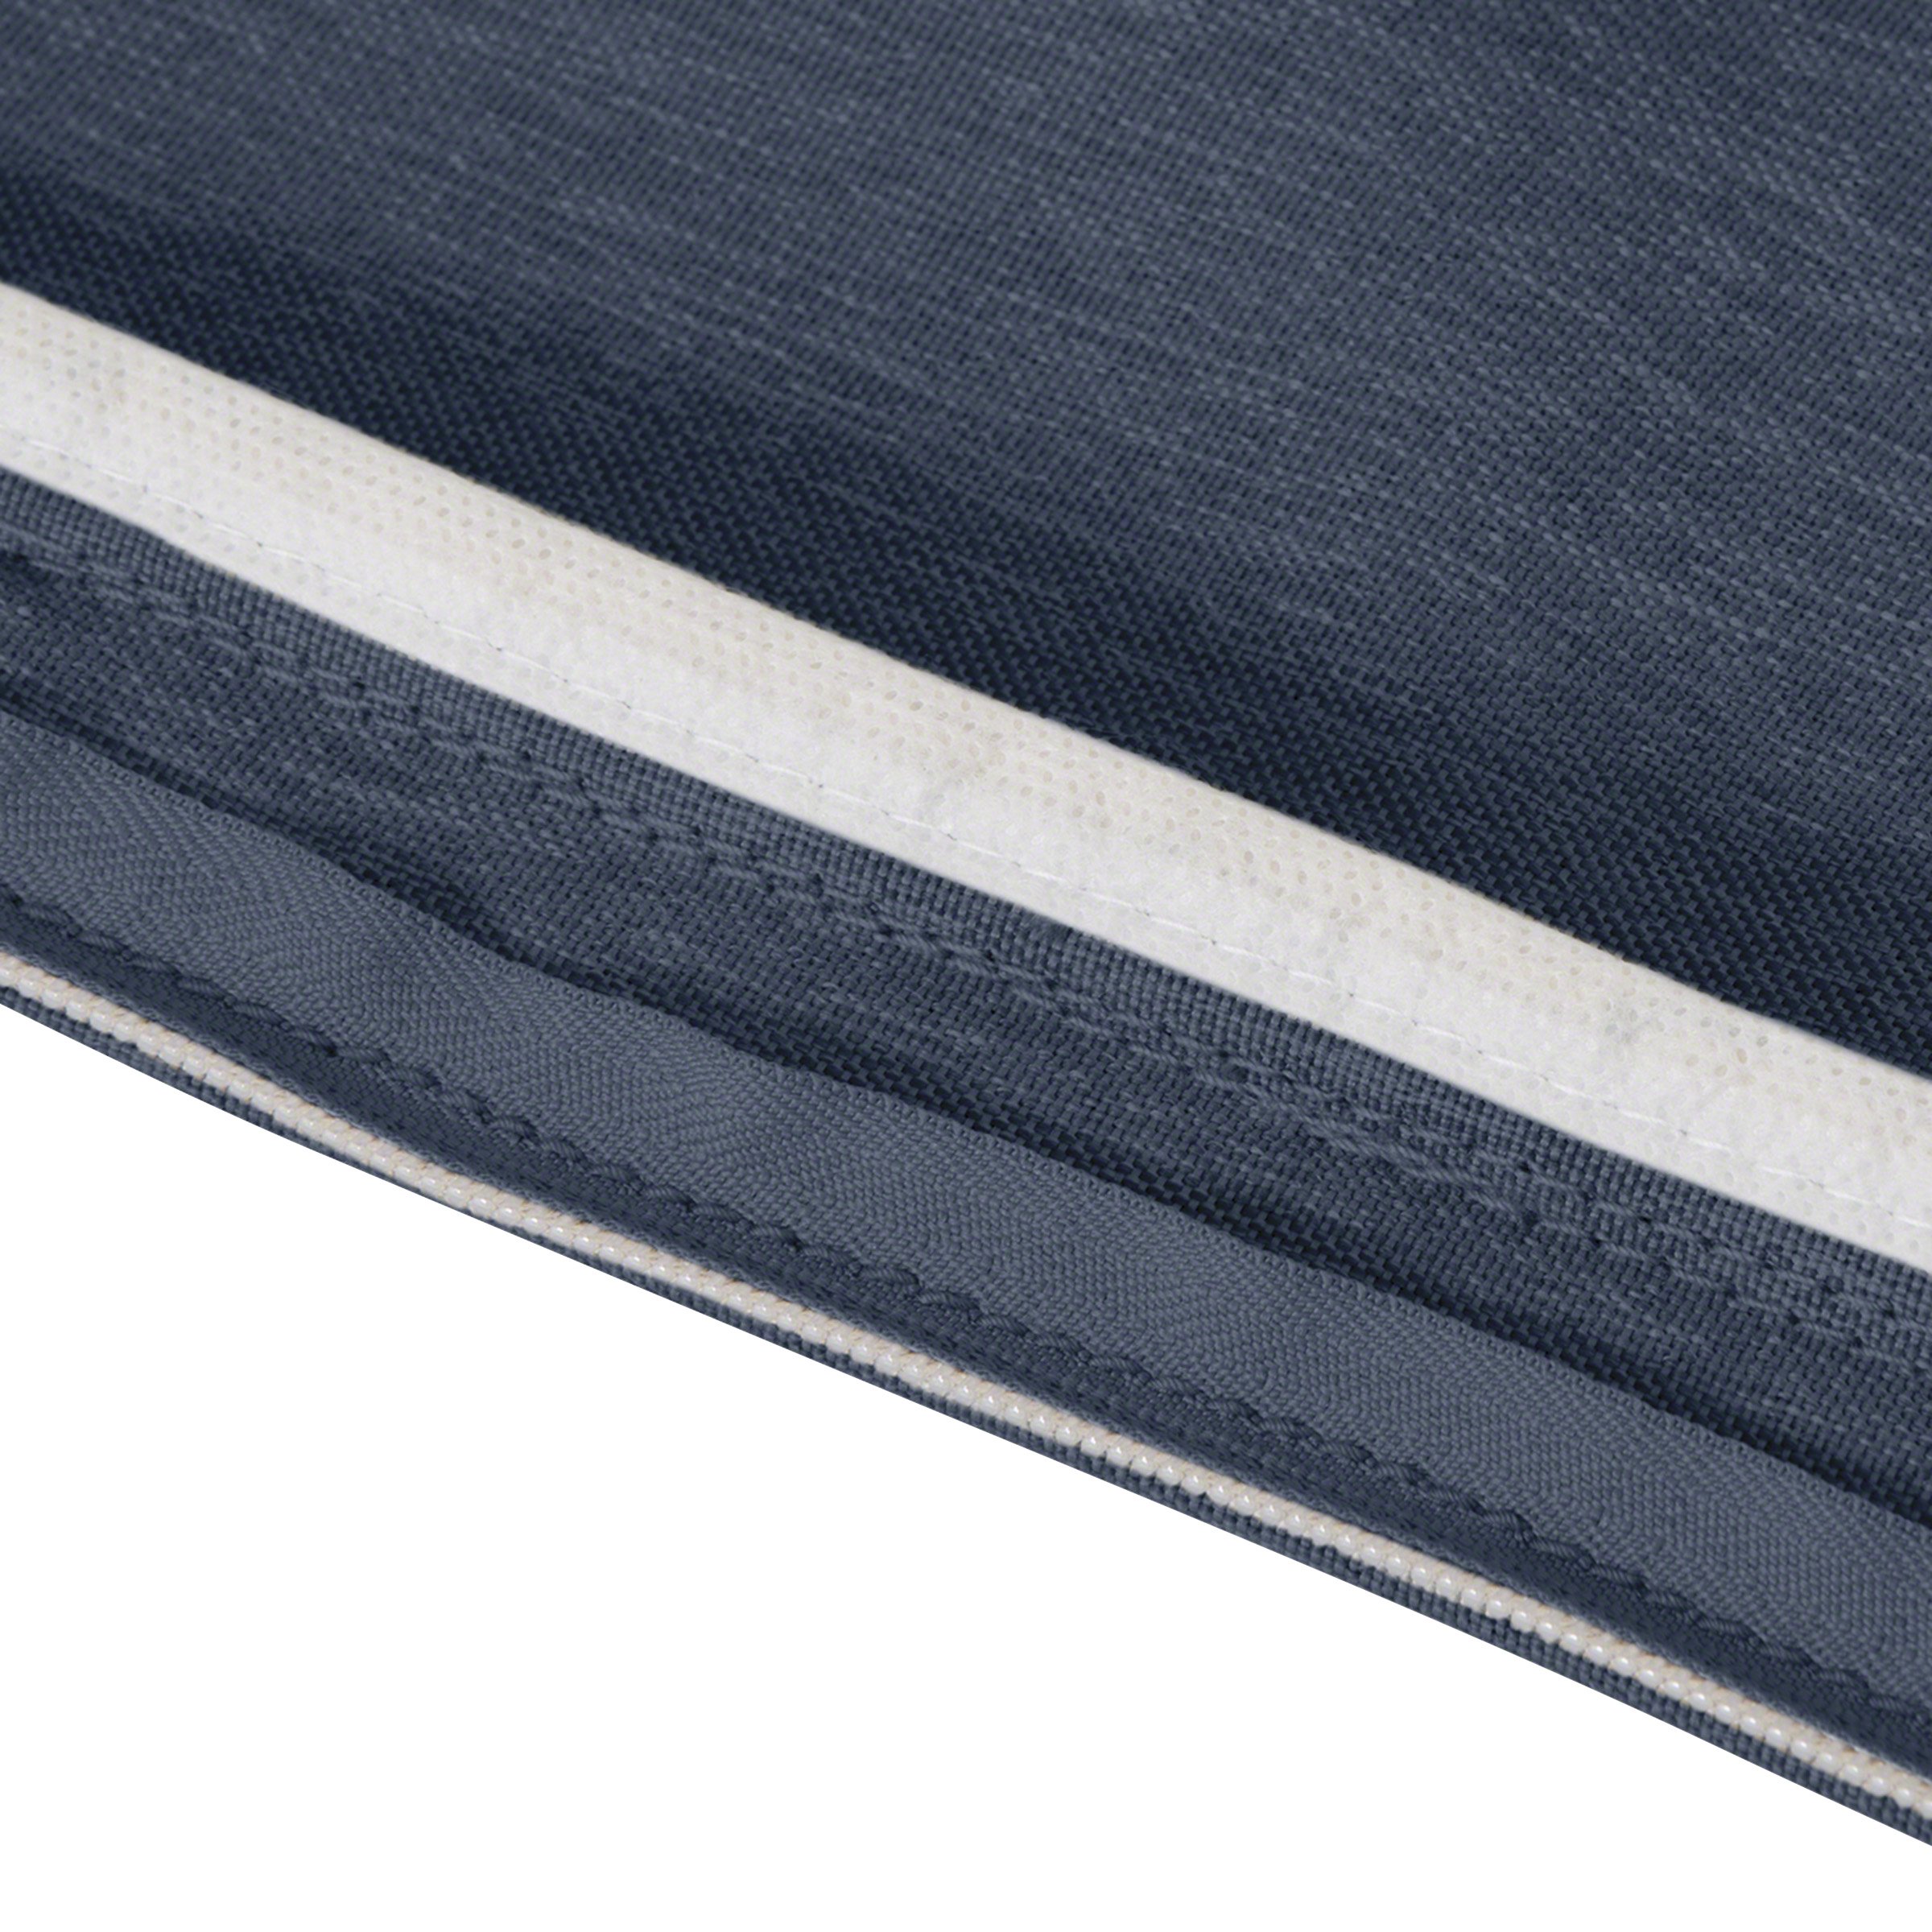 Classic Accessories Montlake FadeSafe Water-Resistant 42 x 18 x 3 Inch Outdoor Bench Cushion, Heather Indigo Blue, Outdoor Bench, Bench Cushions, Outdoor Cushions